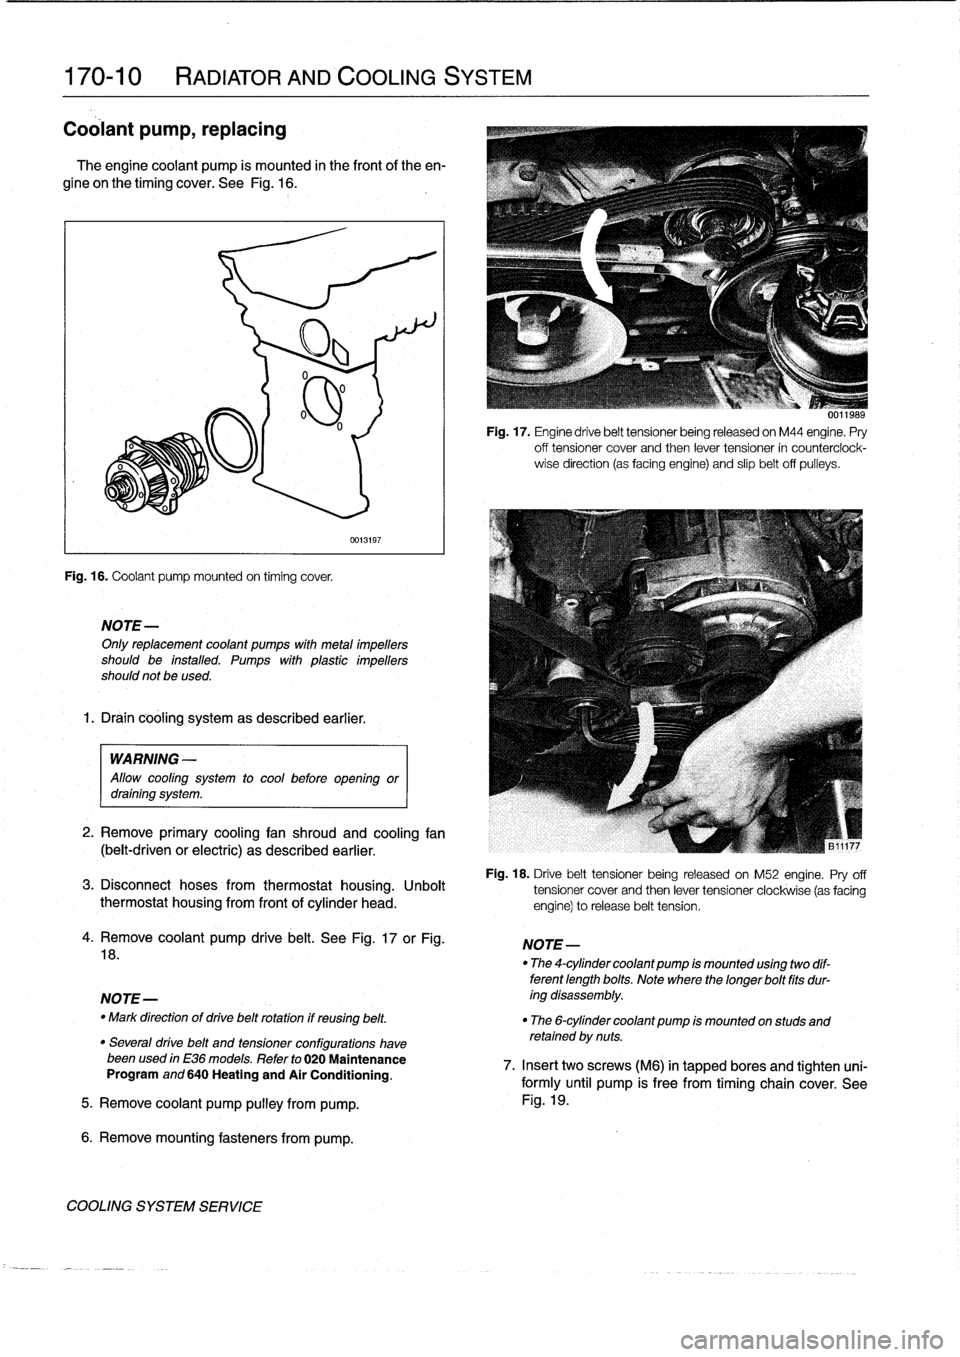 BMW M3 1995 E36 Workshop Manual 
170-10

	

RADIATOR
AND
COOLING
SYSTEM

Coolant
pump,
replacing

The
engine
coolant
pump
is
mounted
in
the
frontof
the
en-

gine
on
the
timing
cover
.
See
Fig
.
16
.

Fig
.
16
.
Coolant
pump
mounted
